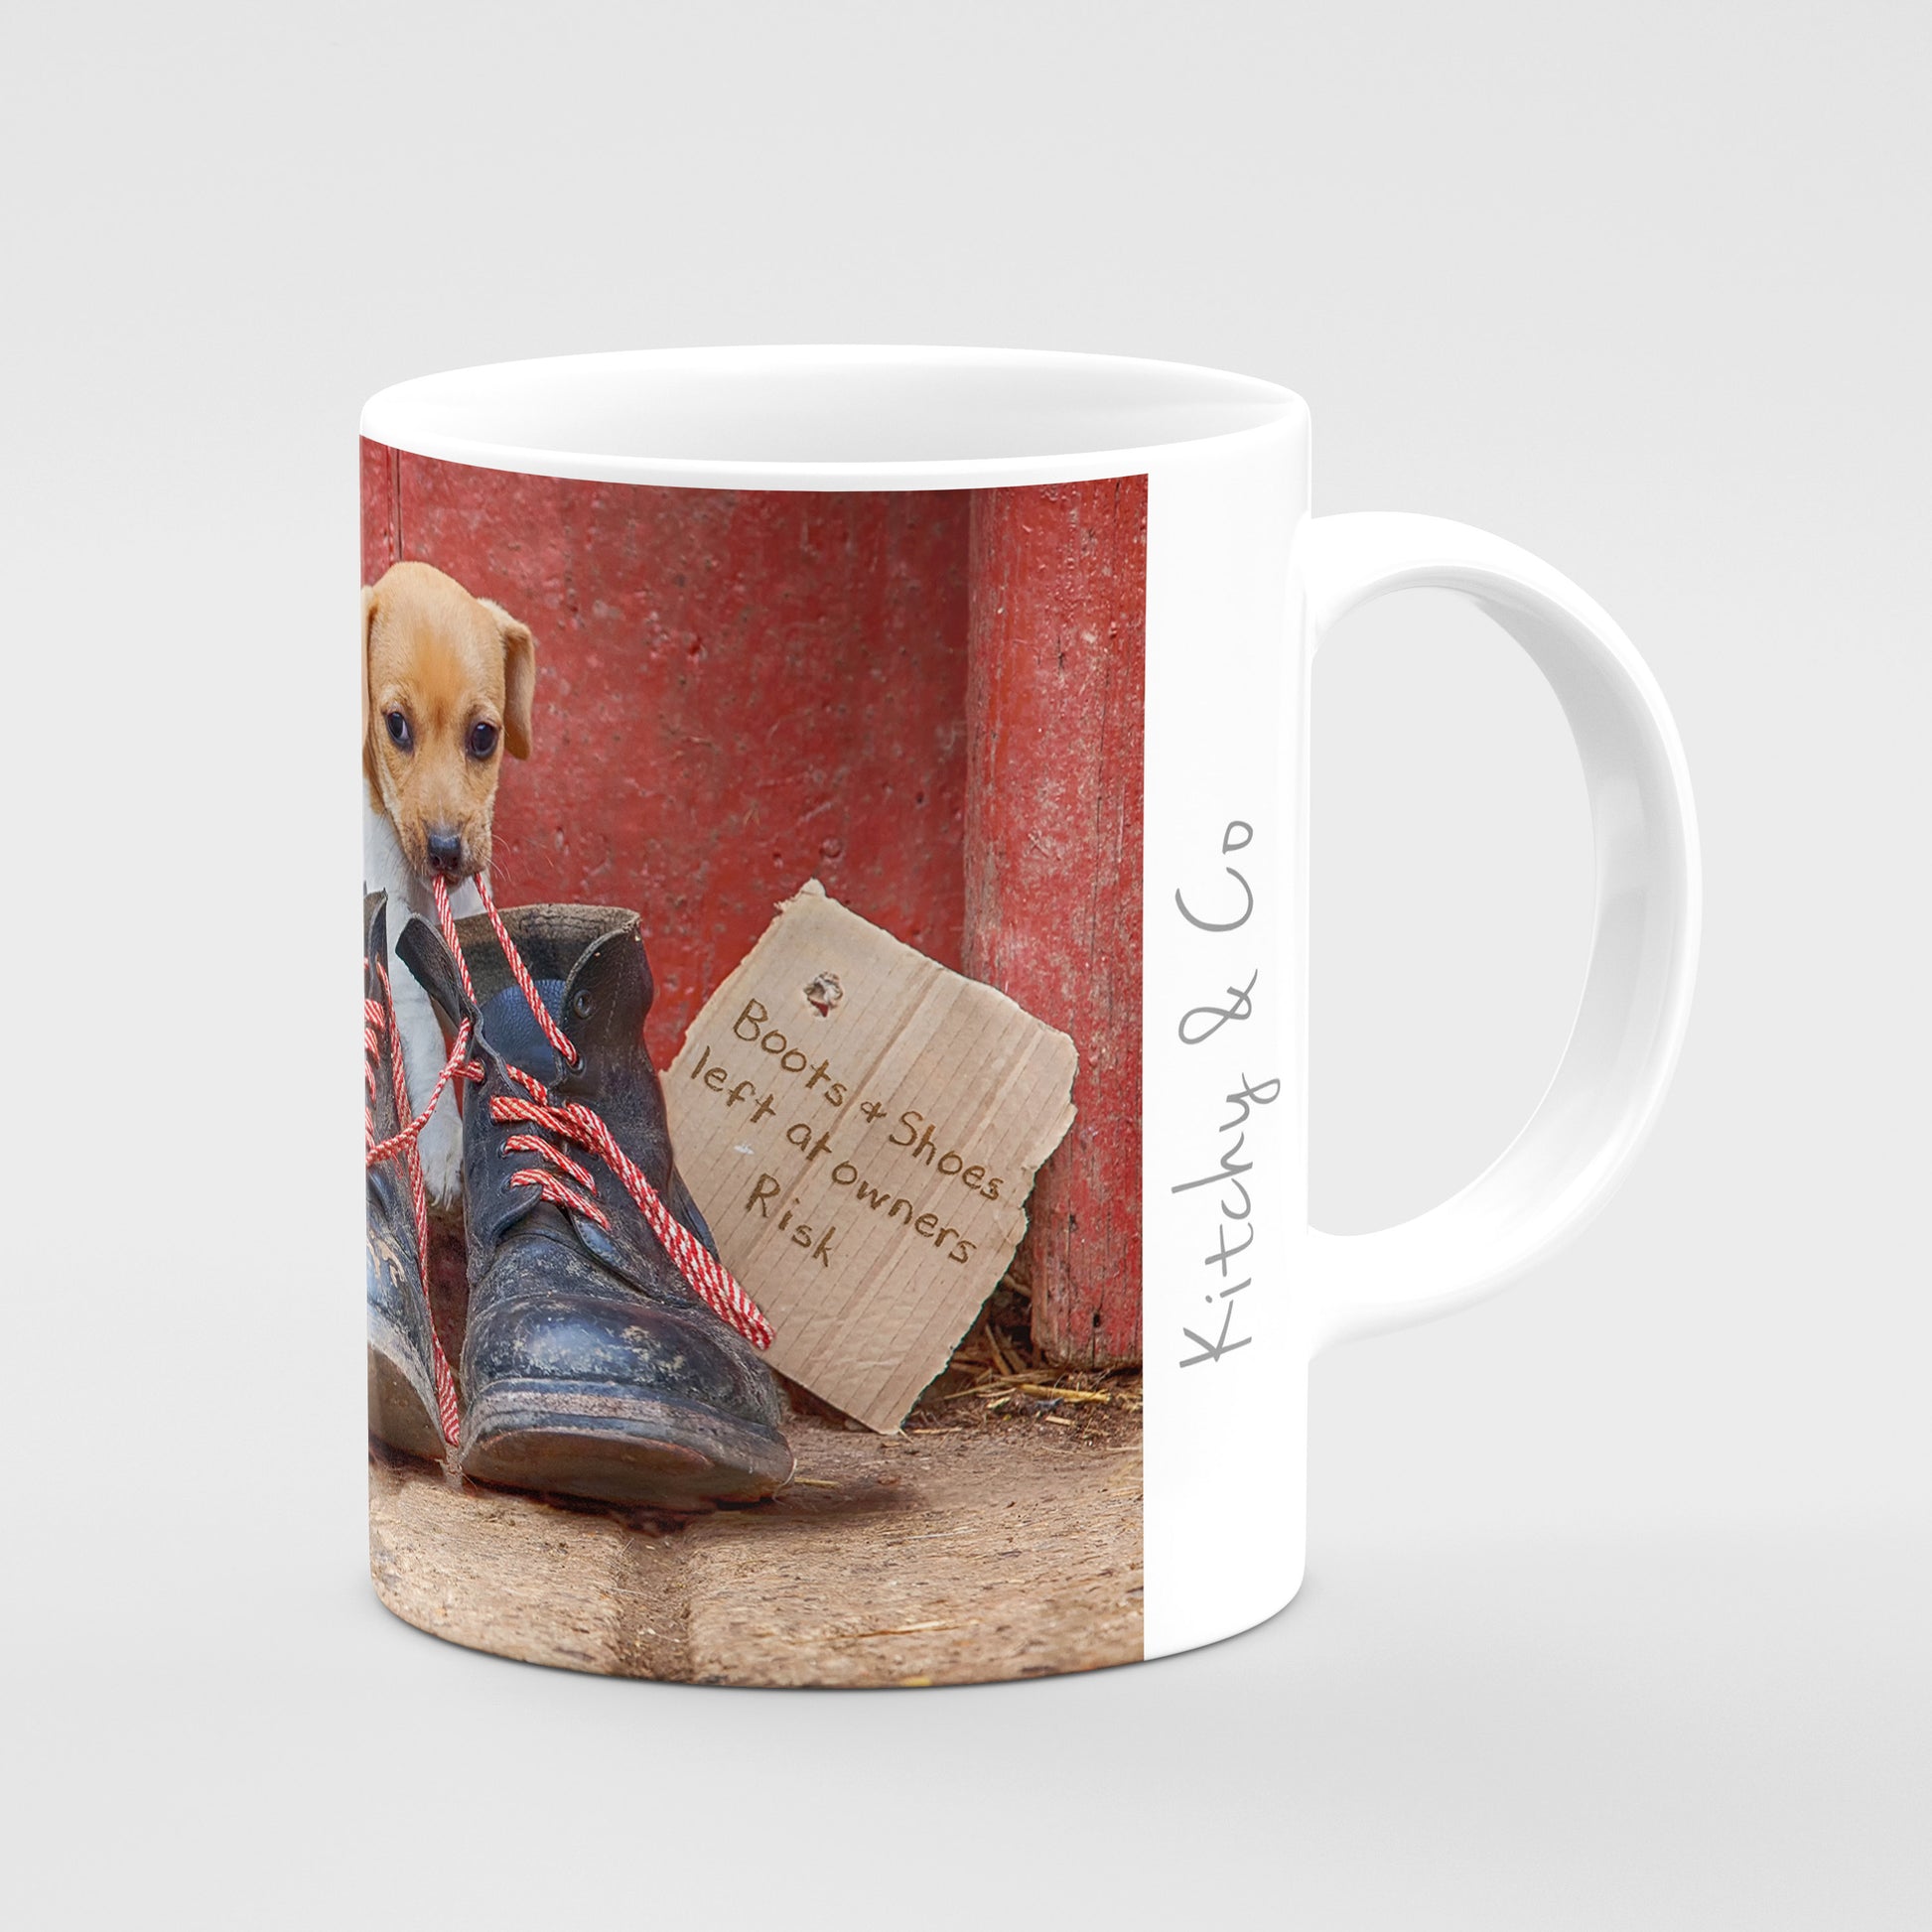 Jack Russell Terrier Pups Mug - New laces for old boots - Kitchy & Co Mugs